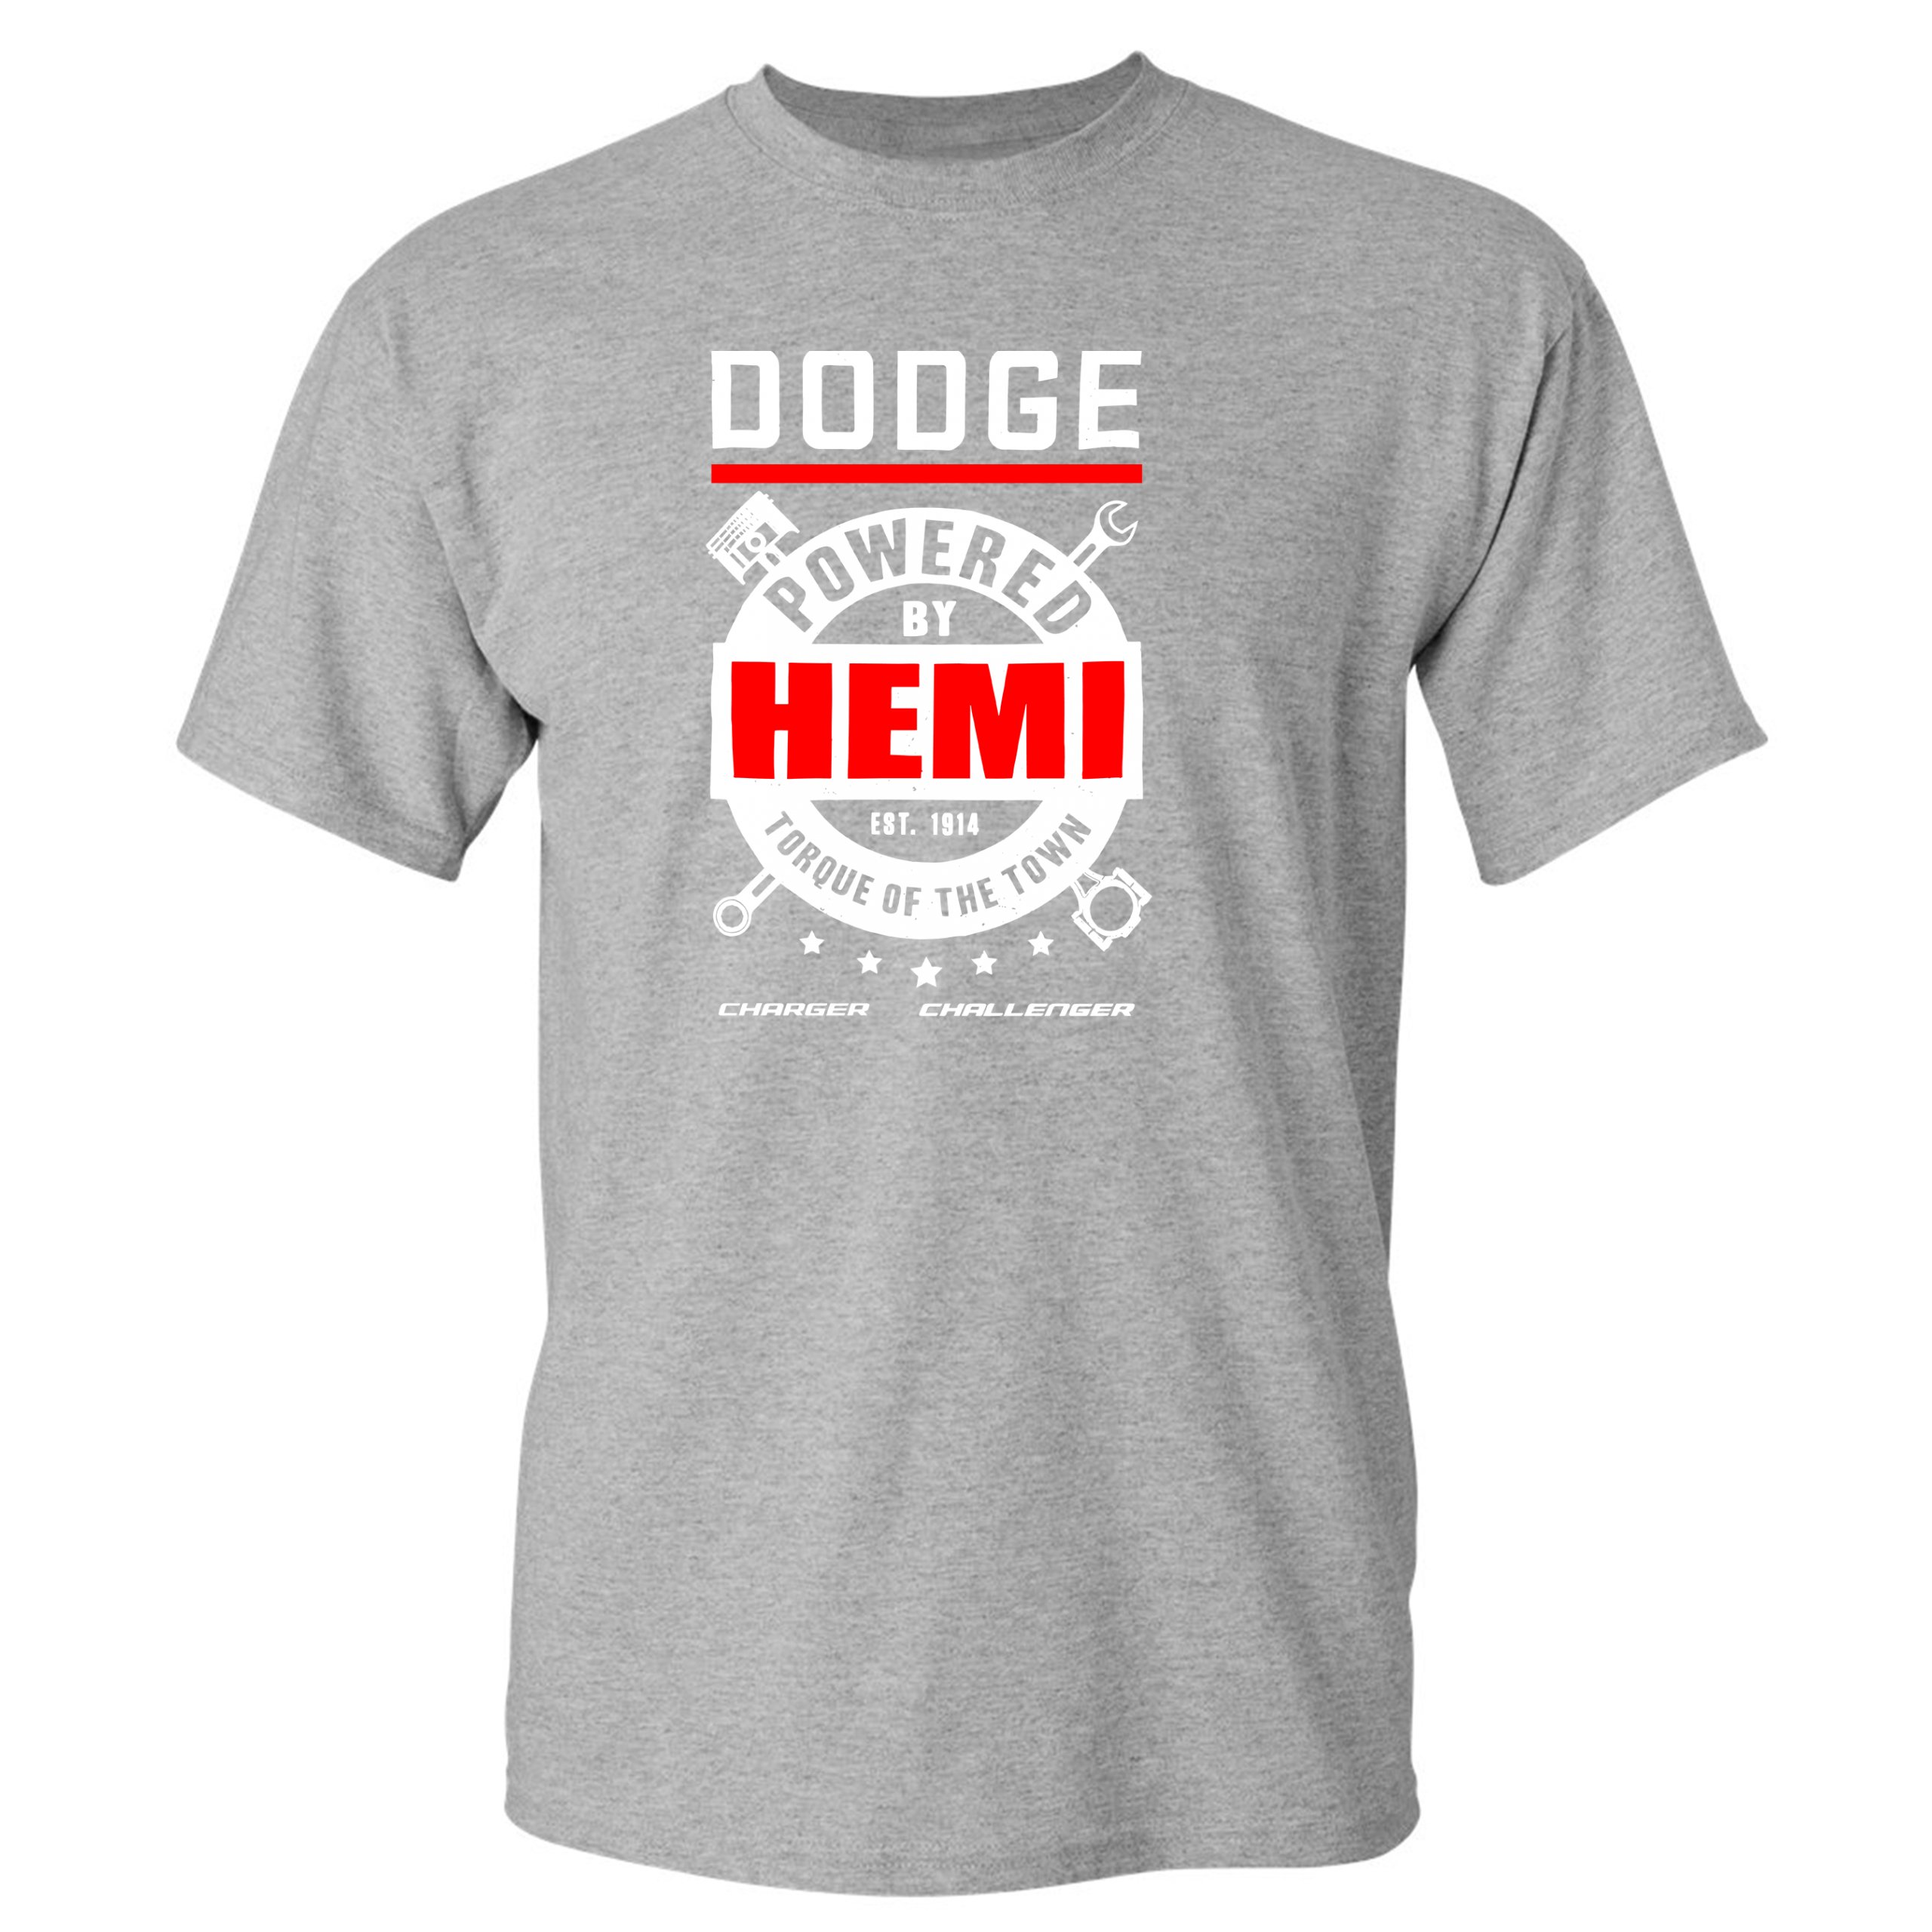 Dodge Powered By Hemi T Shirt Licensed Dodge Charger Challenger Mens